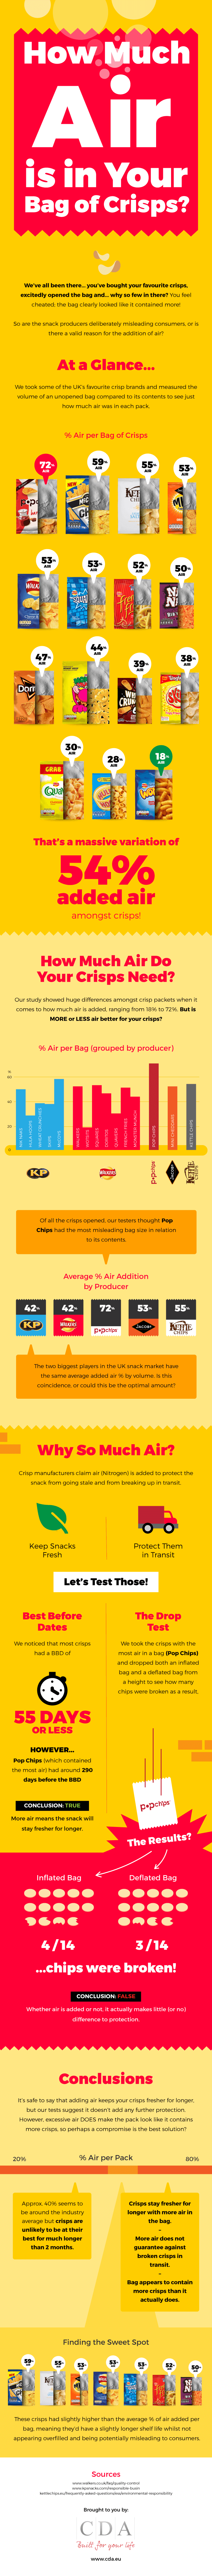 how much air is in your crisps